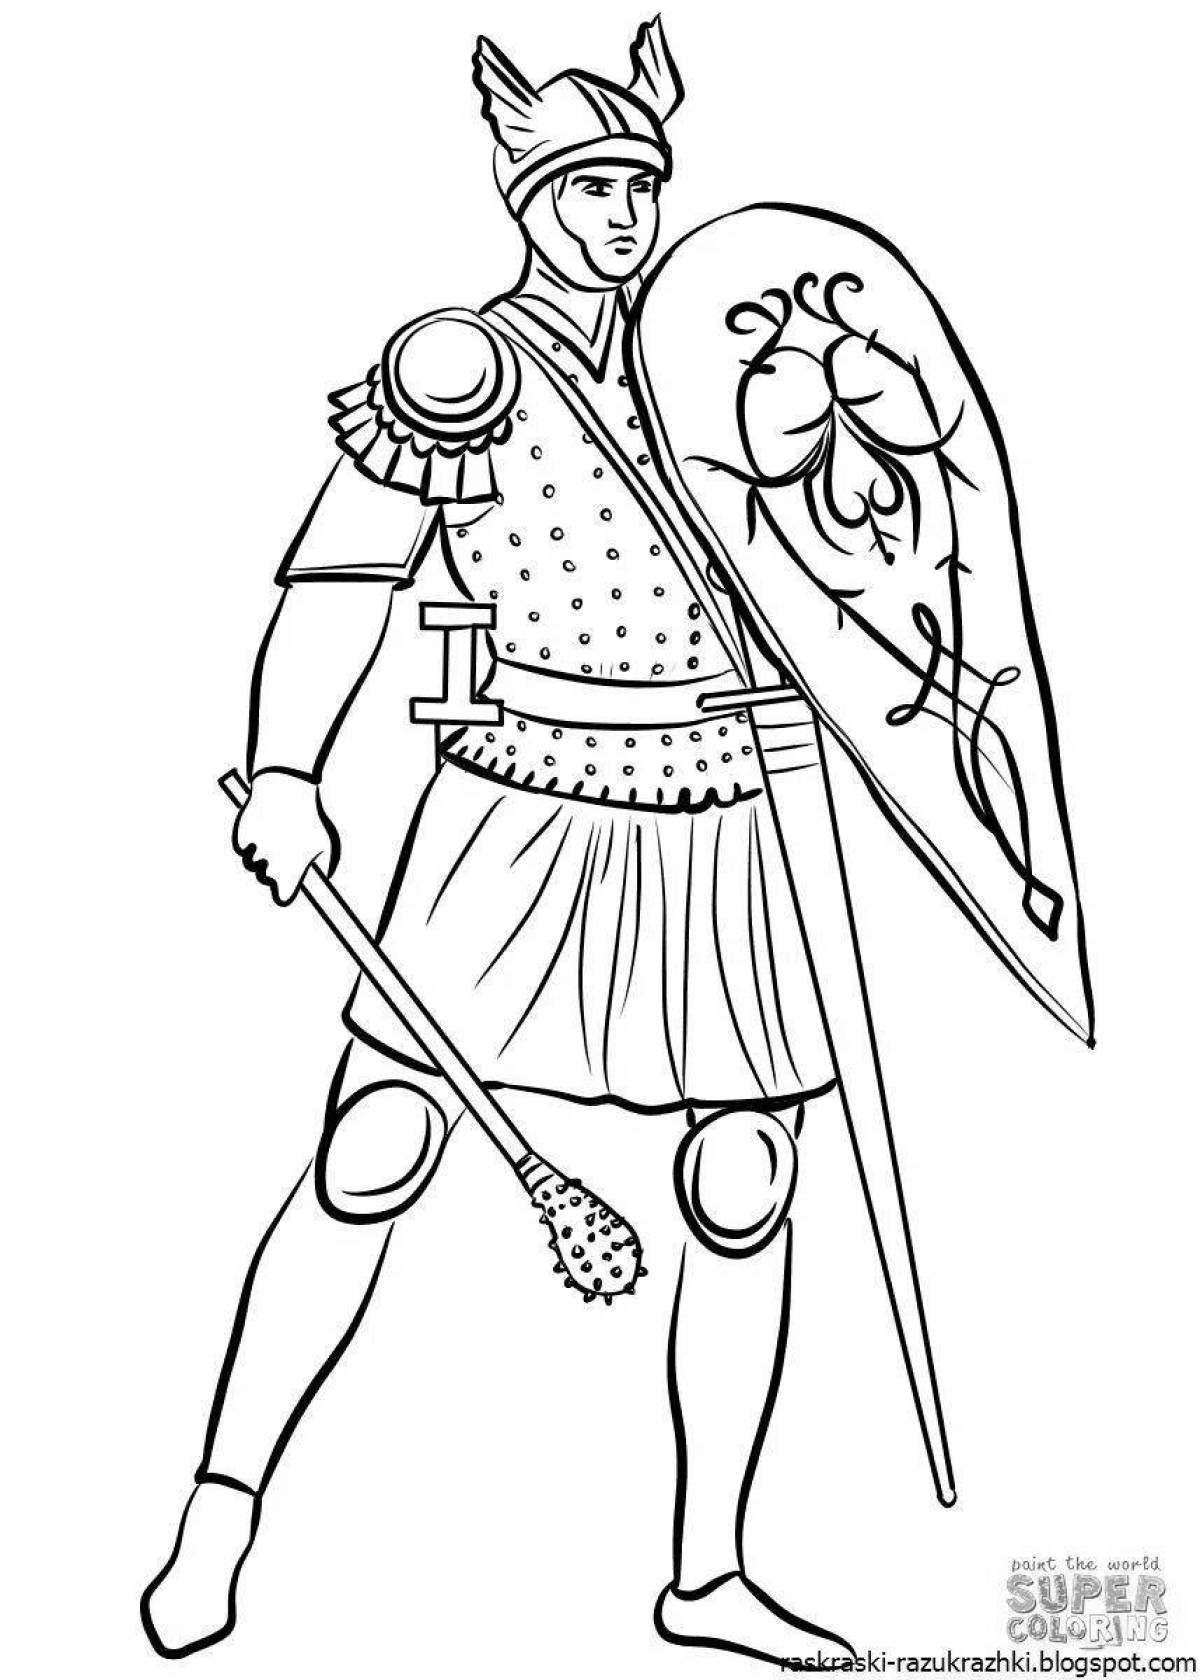 Heroic warrior coloring page